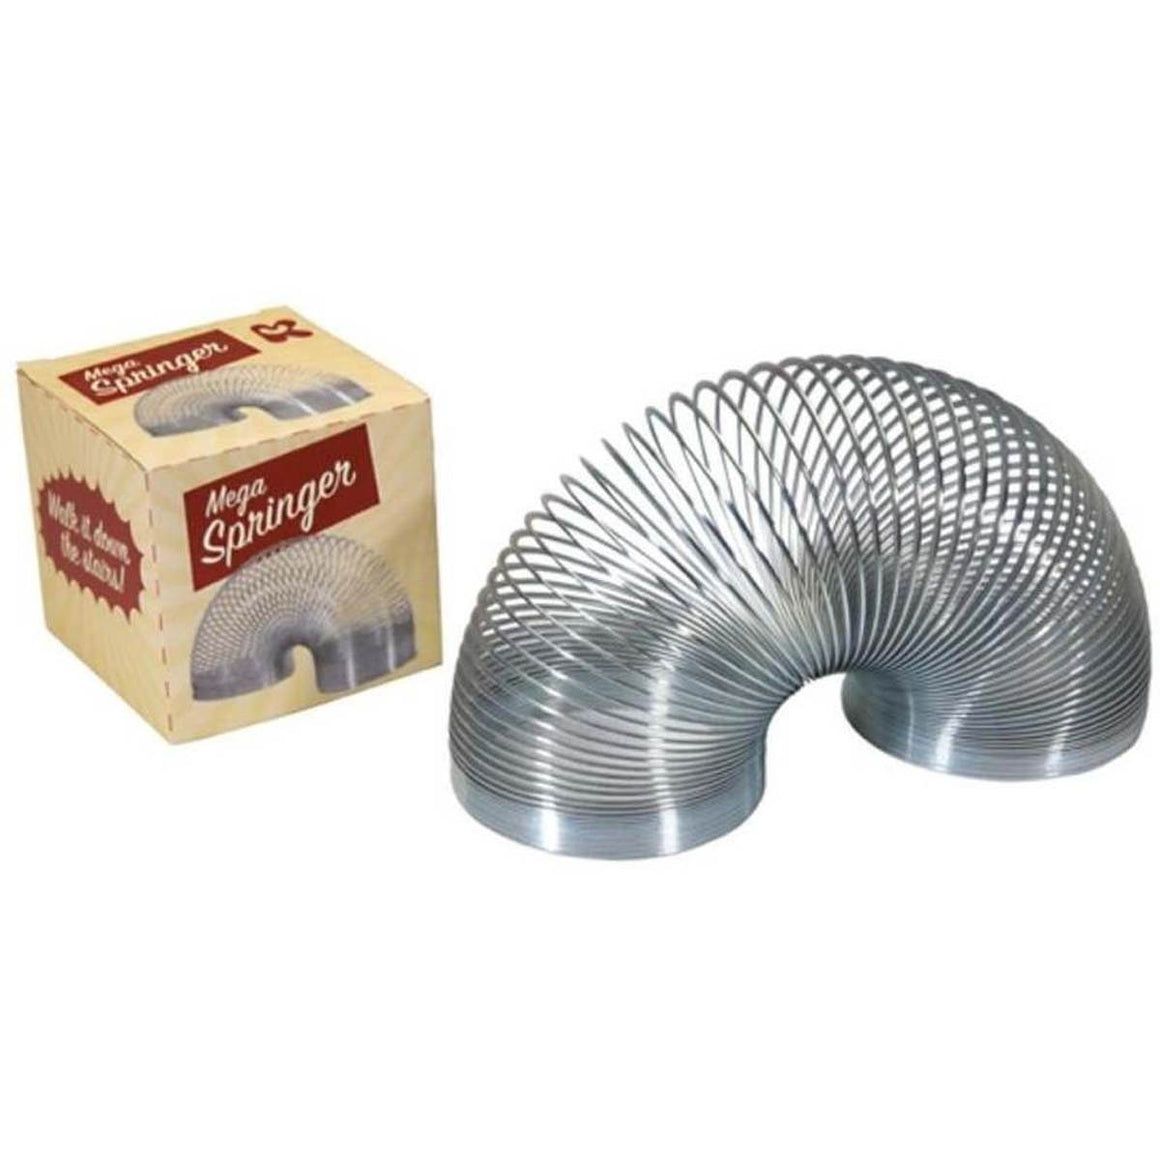 A classic Slinky Style spring toy shown next to its box. The box features the text "Mega Springer"